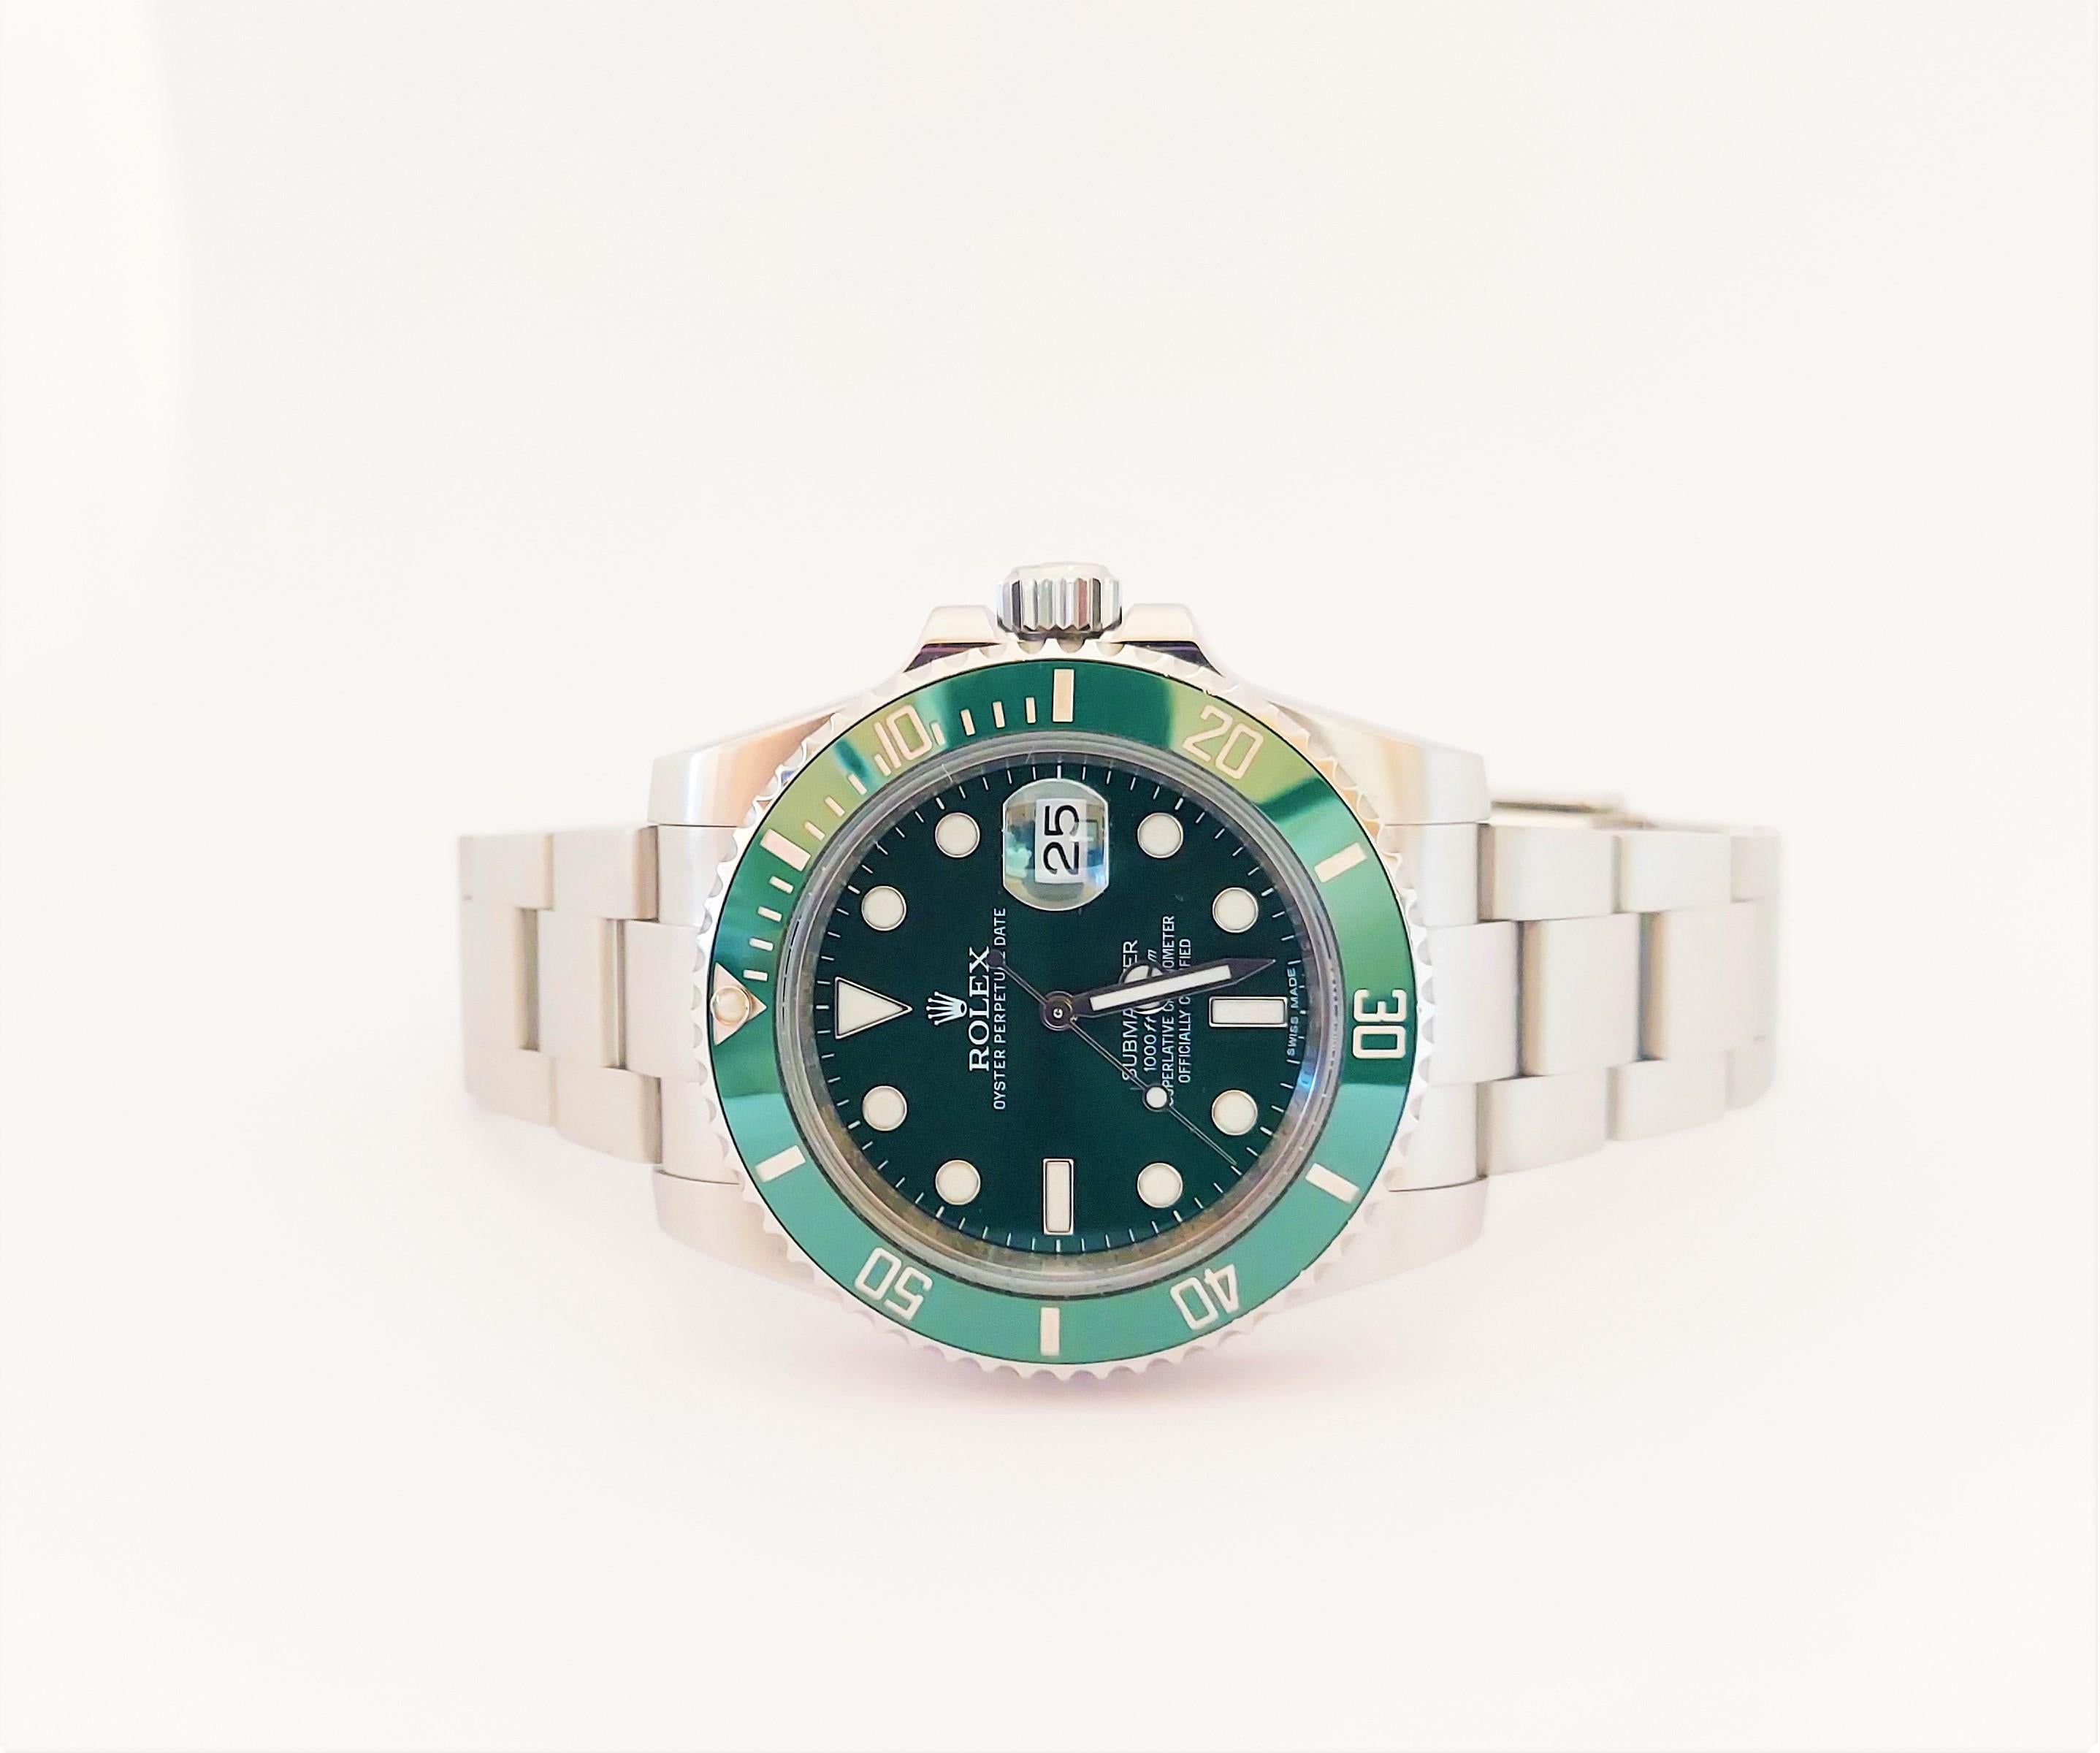 Brand - Rolex
Condition - Pre-owned 
Model - 116610LV
Gender - Men's 
Style - Submariner/the hulk
Case size - 41mm
Crystal - Sapphire 
Dial - Green Sub 
Bezel - Ceramic Green 
Metals - Stainless Steel 
Wrist Band - Steel Oyster
Wrist size - 8